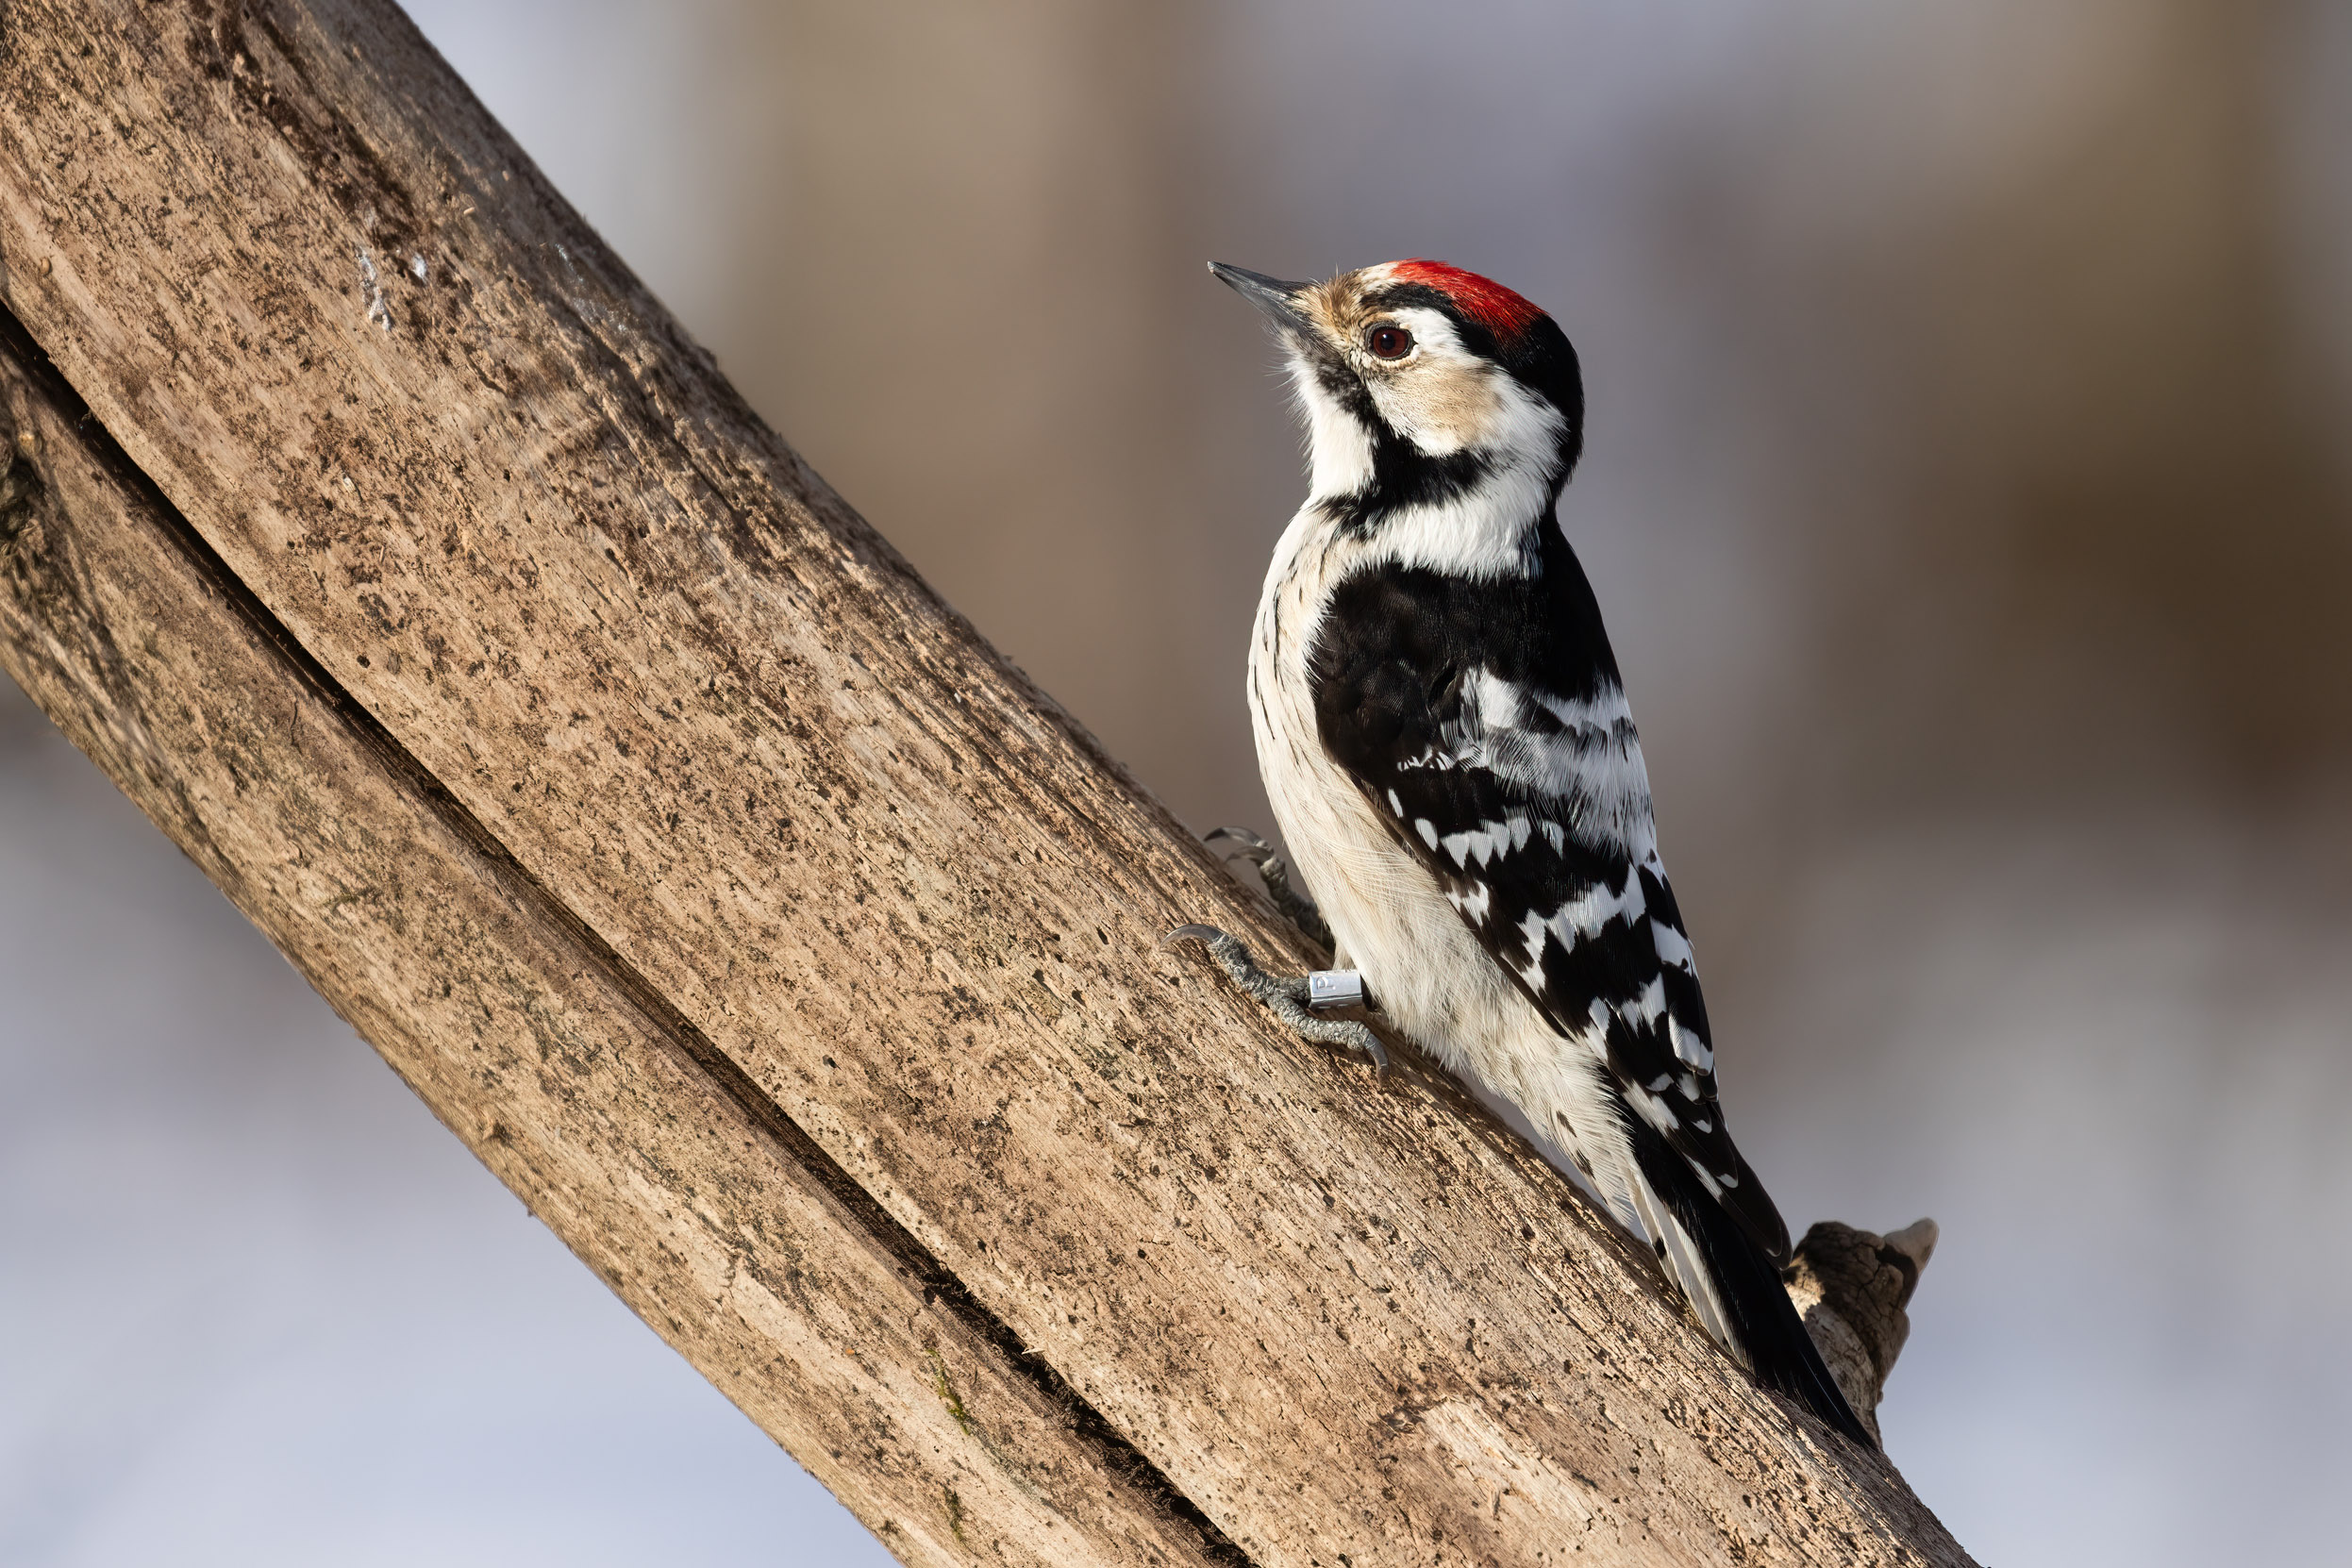 A lone Lesser Spotted Woodpecker perched on the side of a tree.